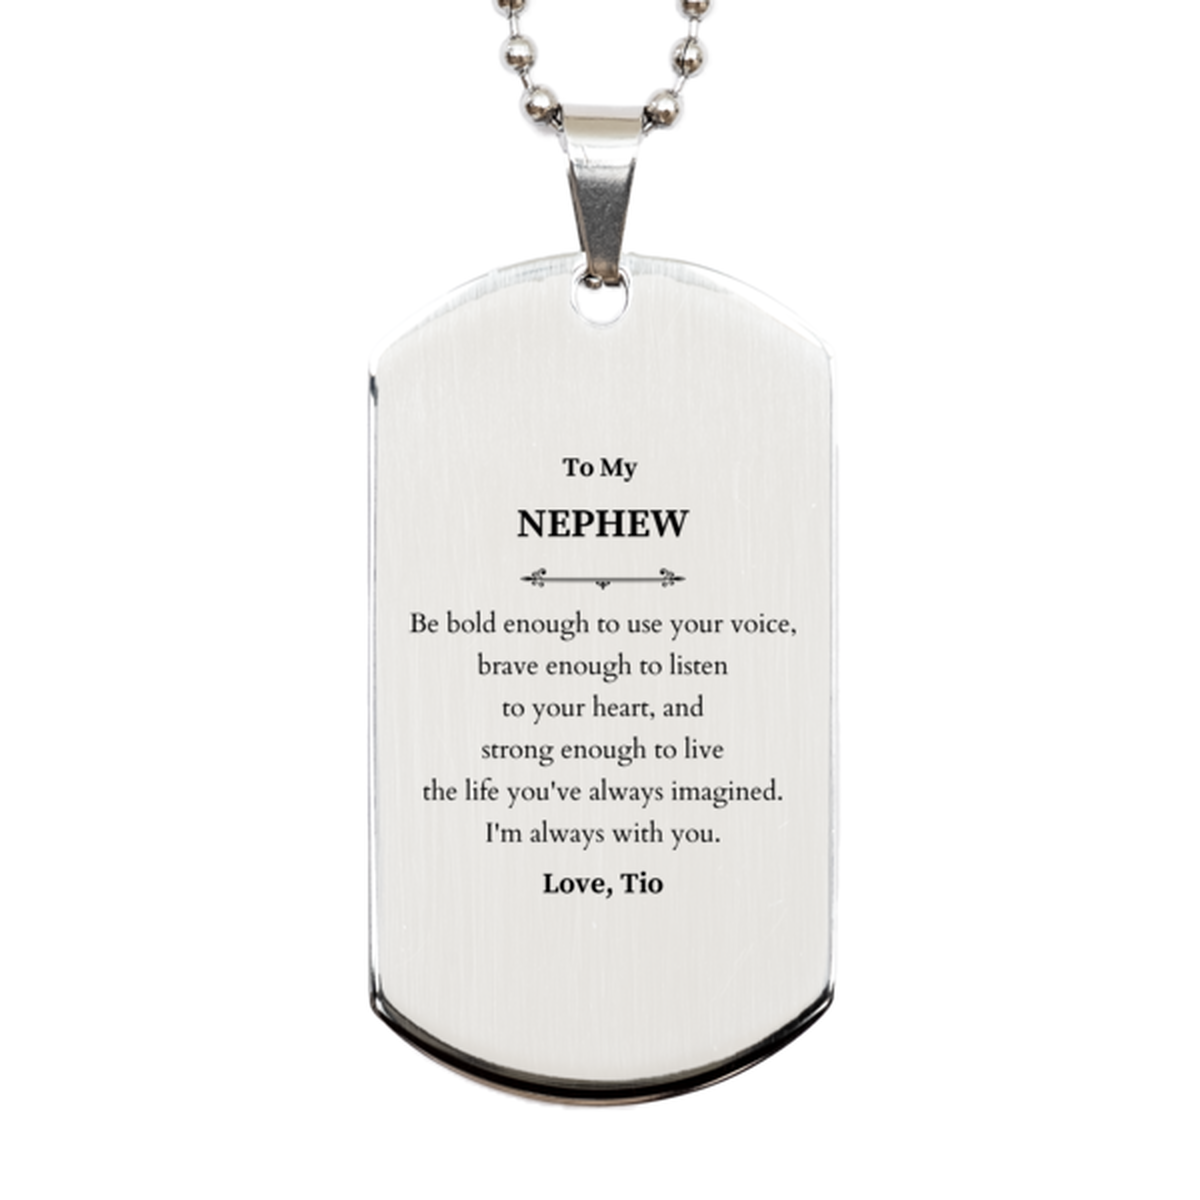 Keepsake Nephew Silver Dog Tag Gift Idea Graduation Christmas Birthday Nephew from Tio, Nephew Be bold enough to use your voice, brave enough to listen to your heart. Love, Tio